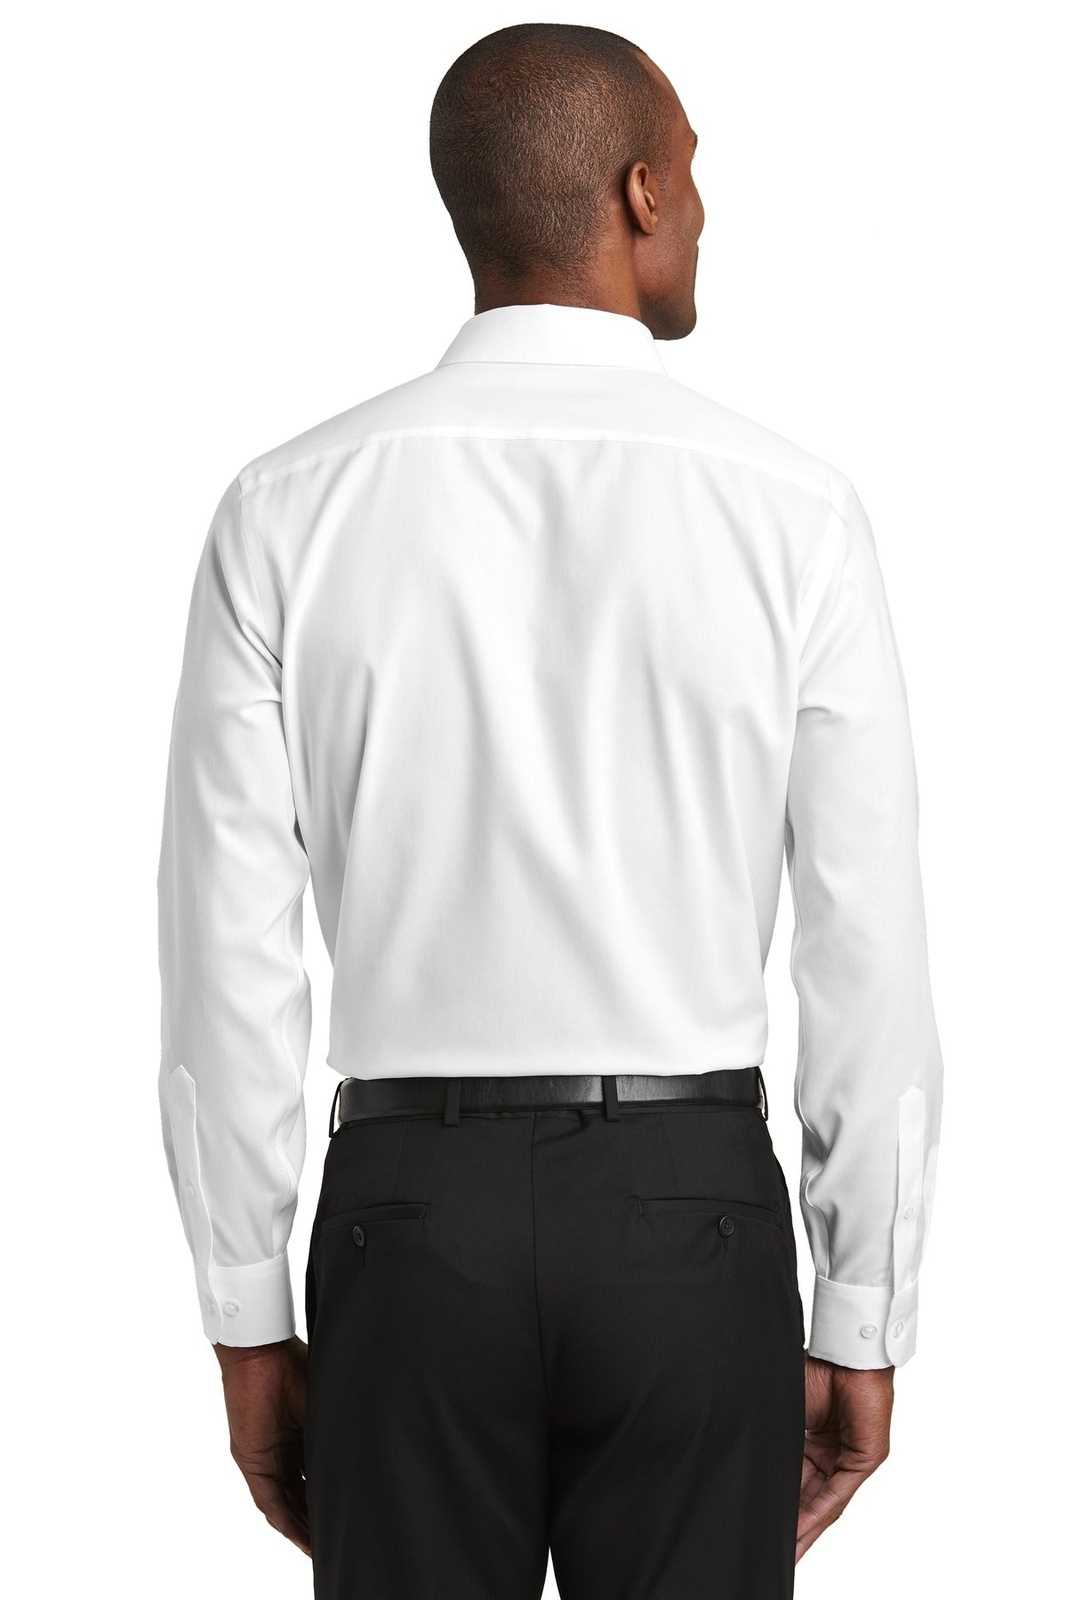 Red House RH620 Slim Fit Pinpoint Oxford Non-Iron Shirt - White - HIT a Double - 2